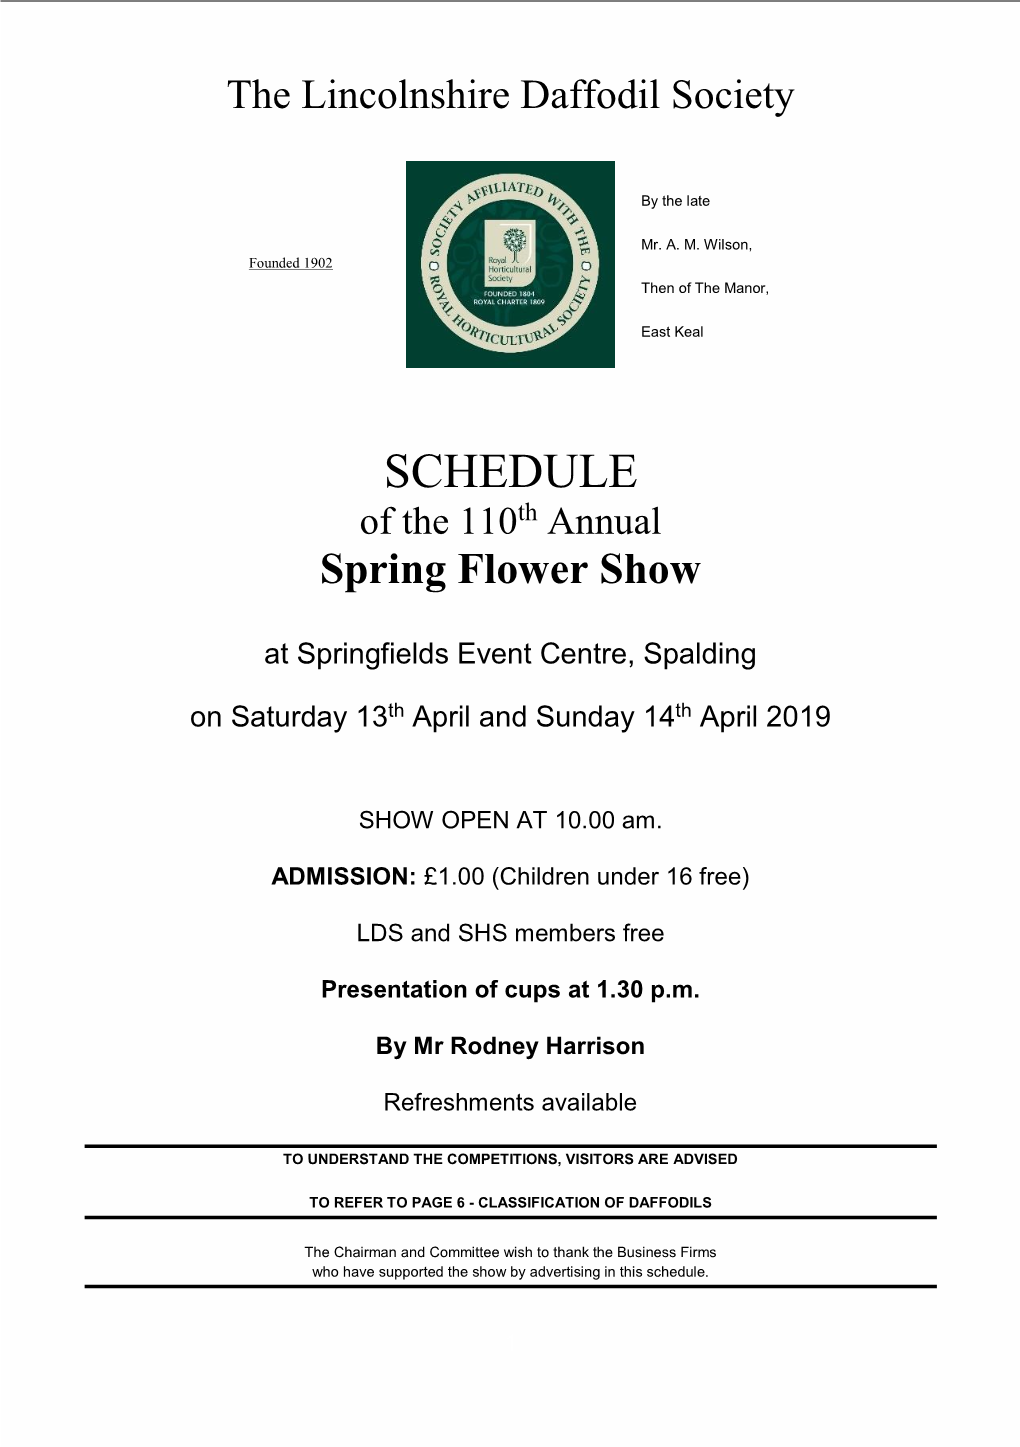 SCHEDULE Th of the 110 Annual Spring Flower Show